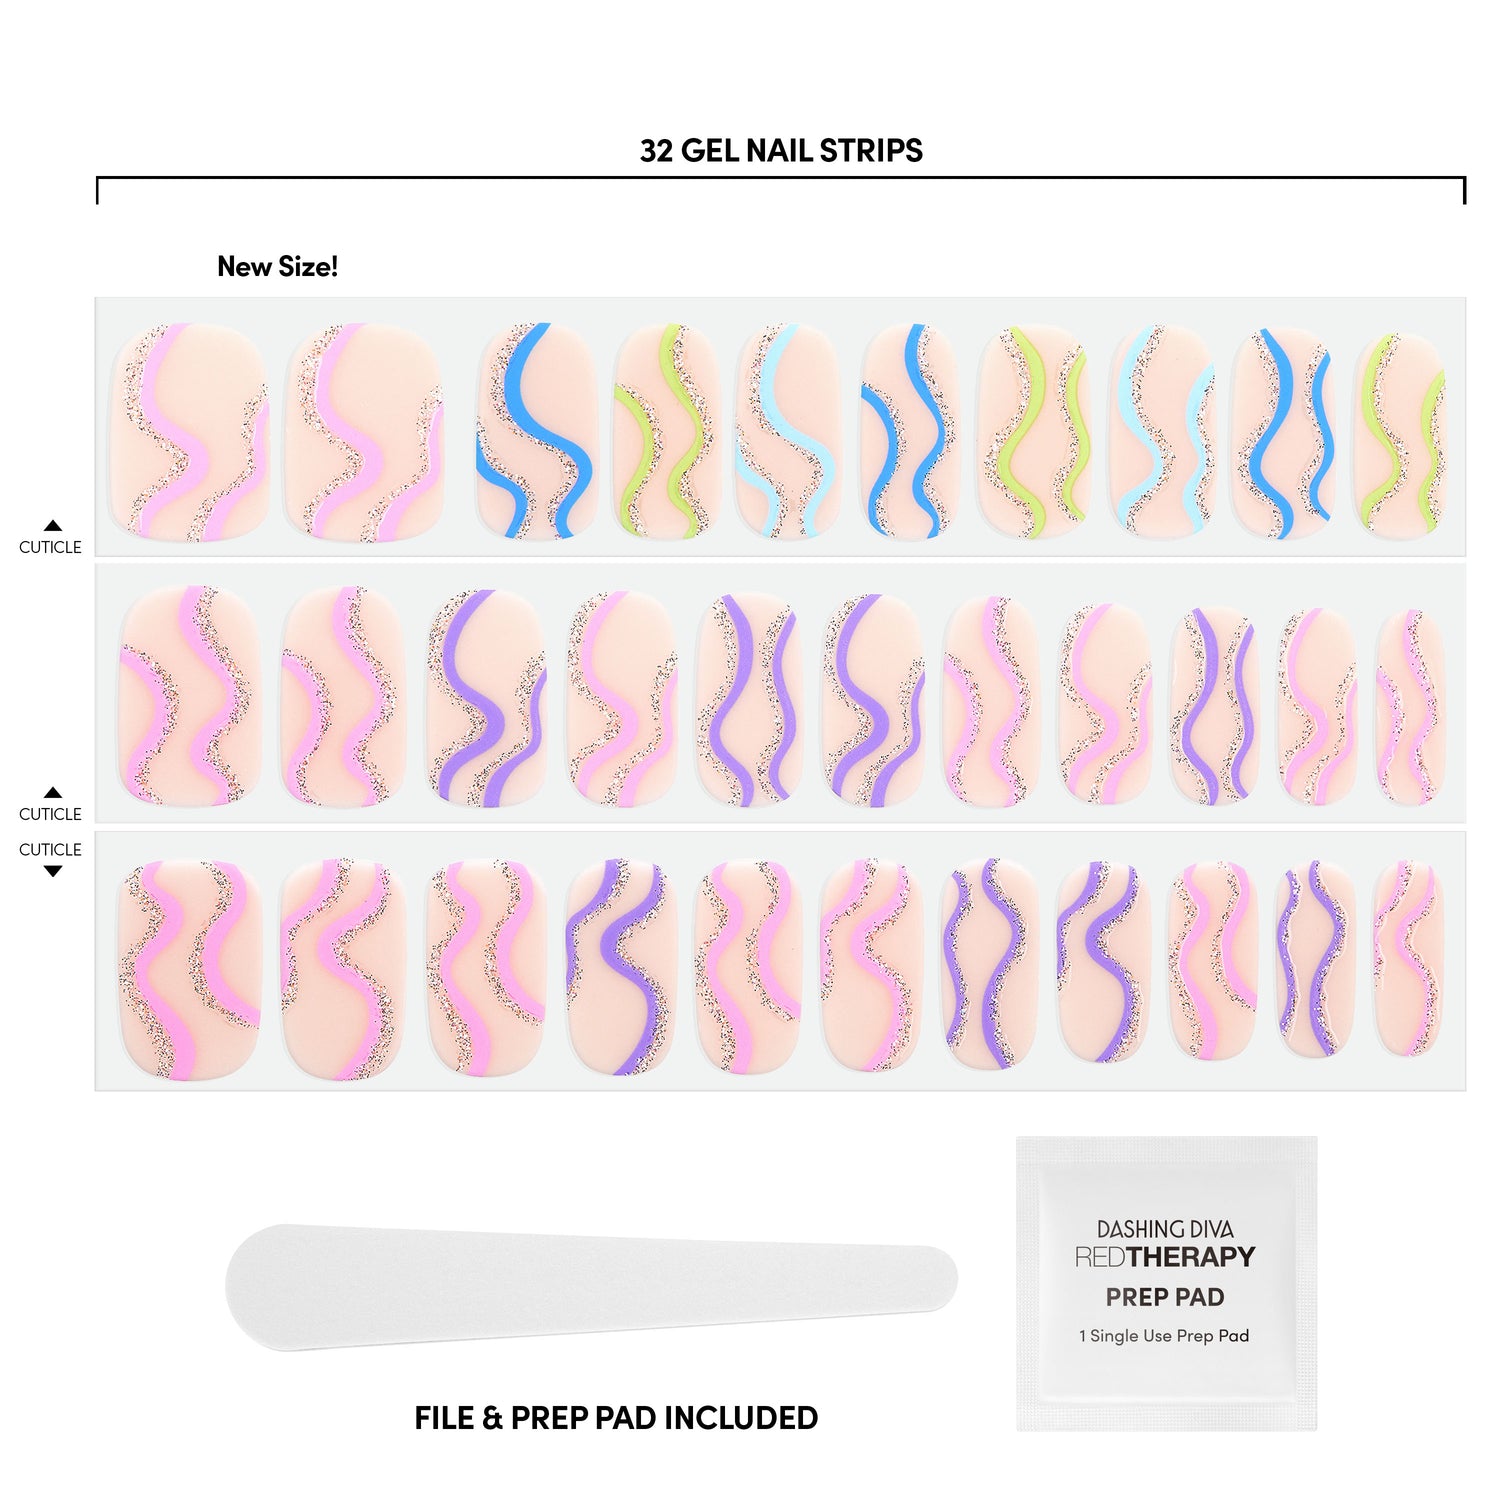  Nude nail strips featuring blue, pink, and green pastel waves with a glossy, high-shine finish.